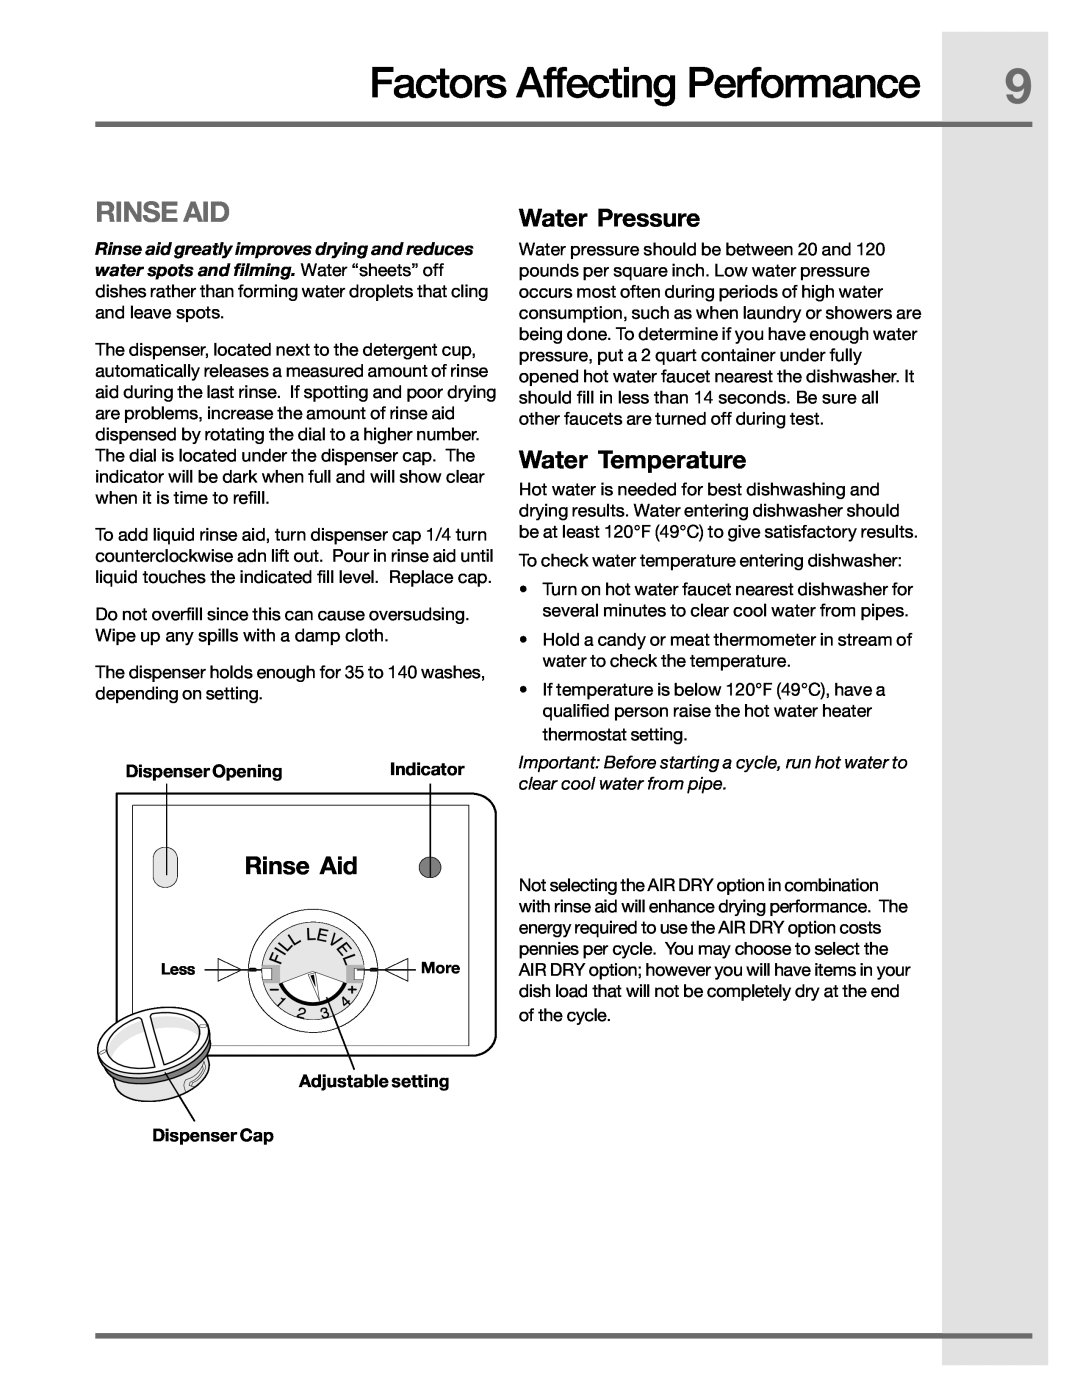 Electrolux 2001/05 manual Factors Affecting Performance, Rinse Aid, Water Pressure, Water Temperature, Dispenser Opening 